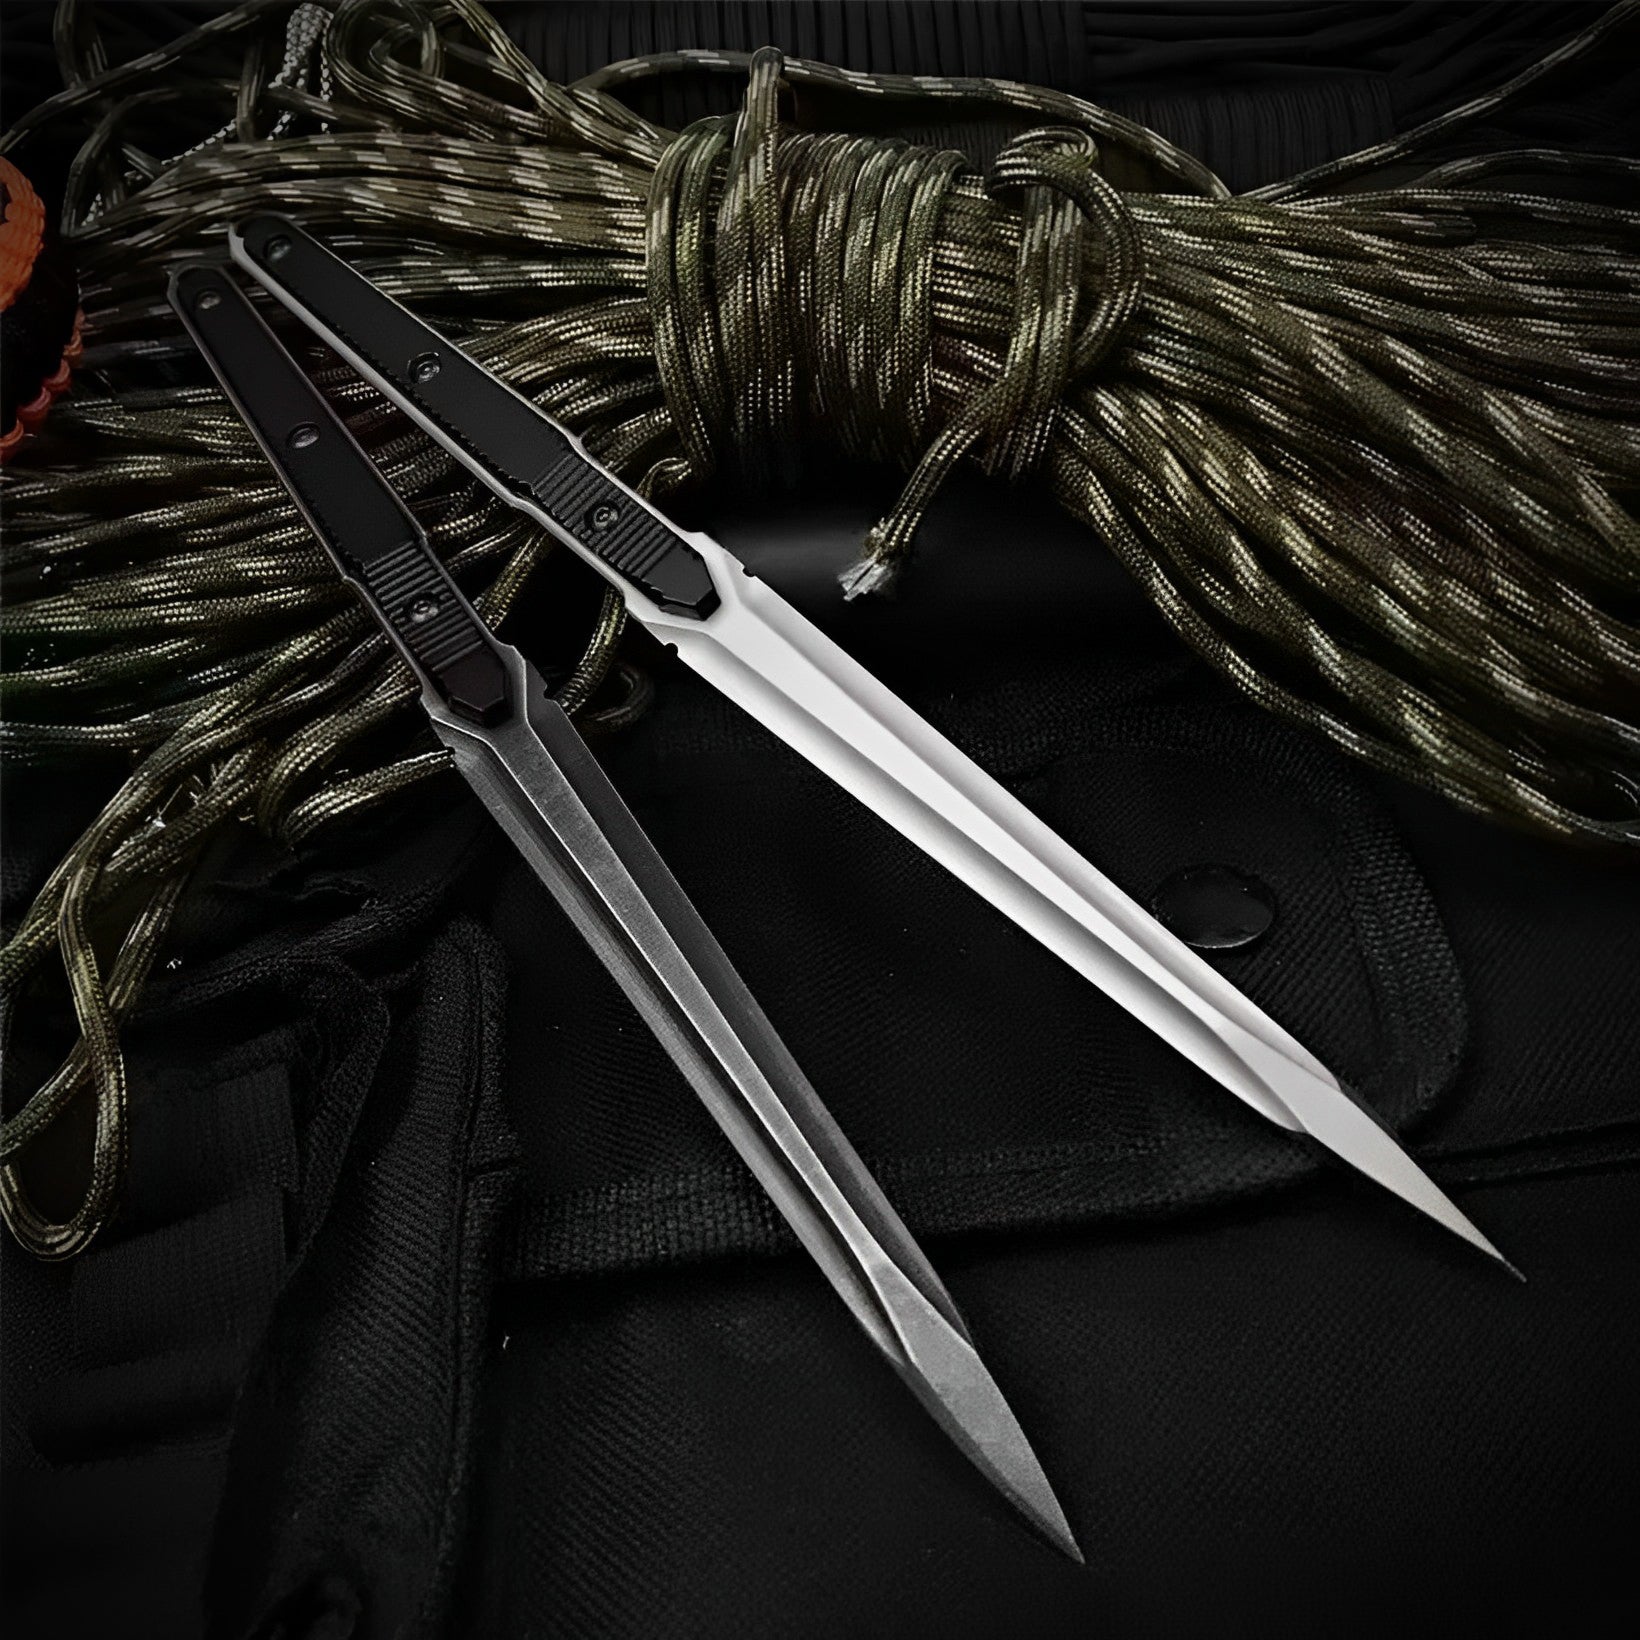 Last Day Promotion 70% OFF - 🔥Needlepoint Force knife⚡Buy 2 Free Shipping Only Today